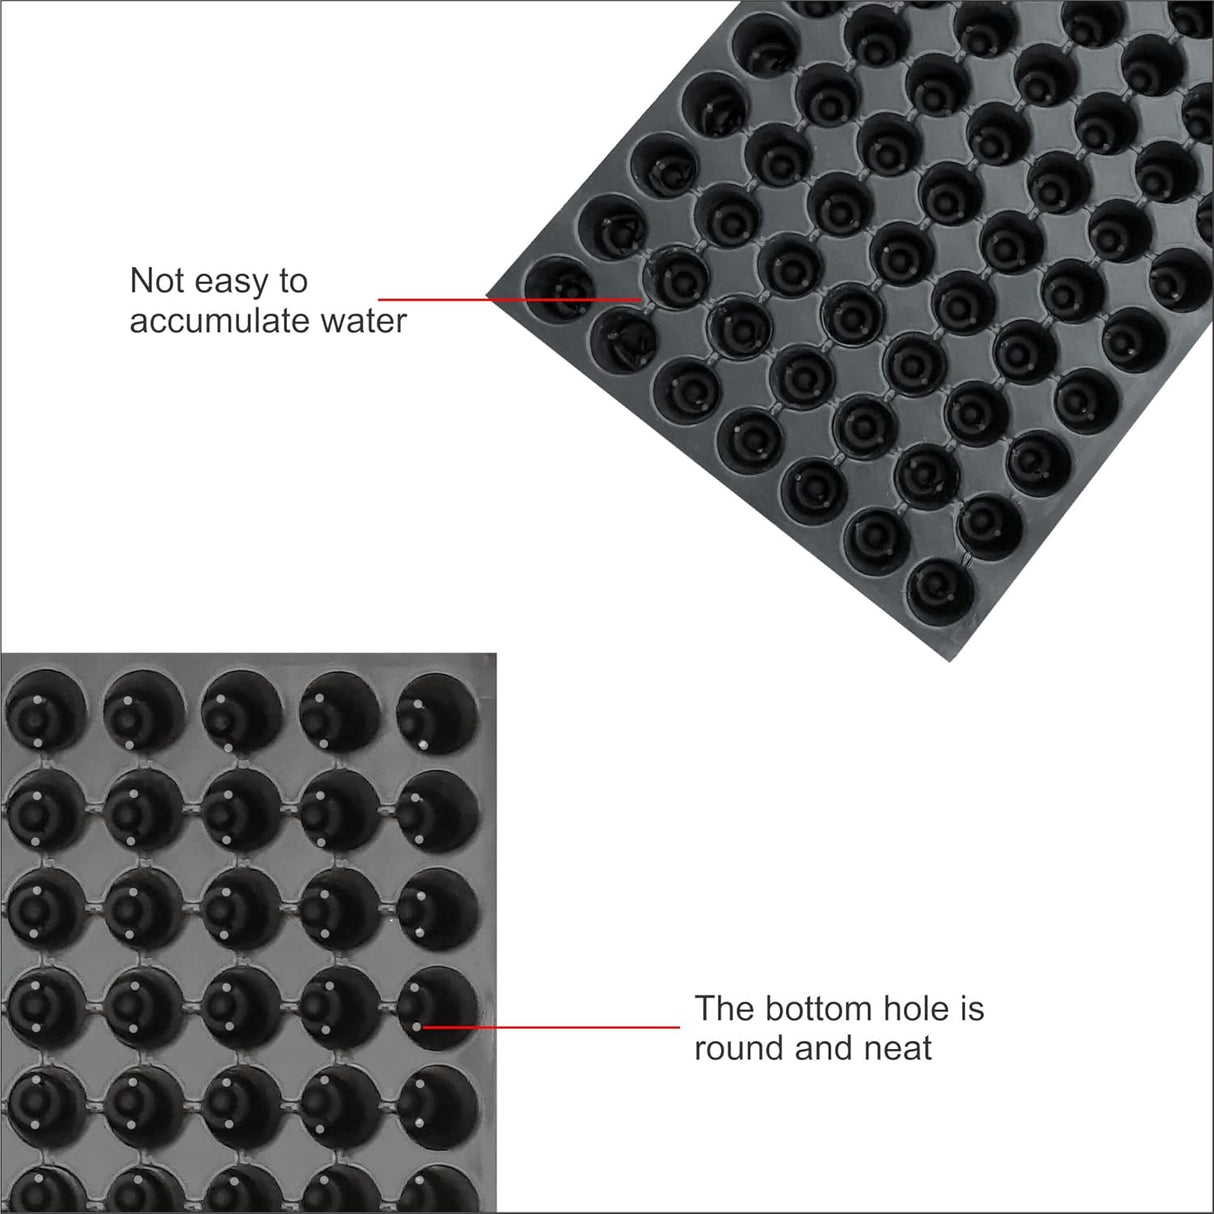 SINGHAL Seedling Tray - Pack of 20 (Black, 98 Holes) Germination Trays for Seedling, Nursery Trays for Plants, Reusable Plastic Trays for Garden Plantation, 98 Cavities Tray for Seeding